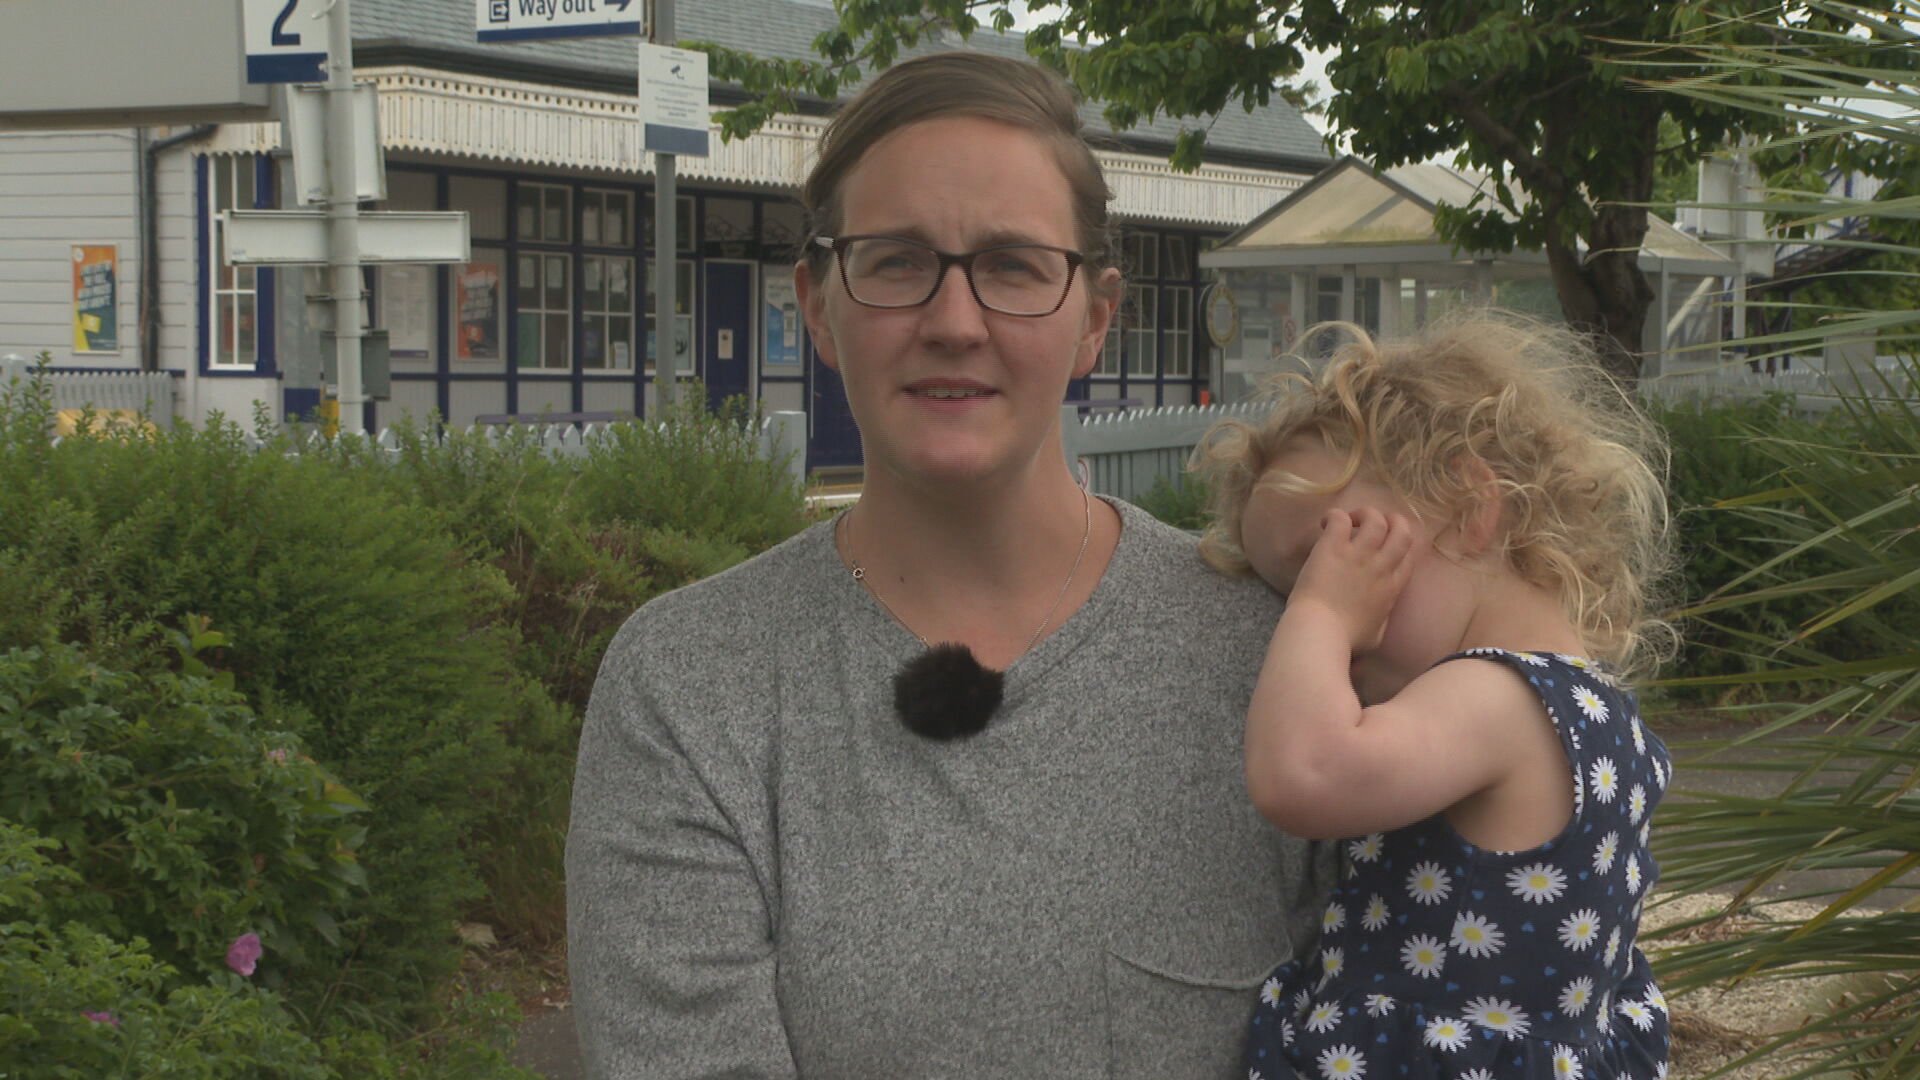 Isla Wallace said the train was important for her and her young family, but added she sympathised with striking workers.